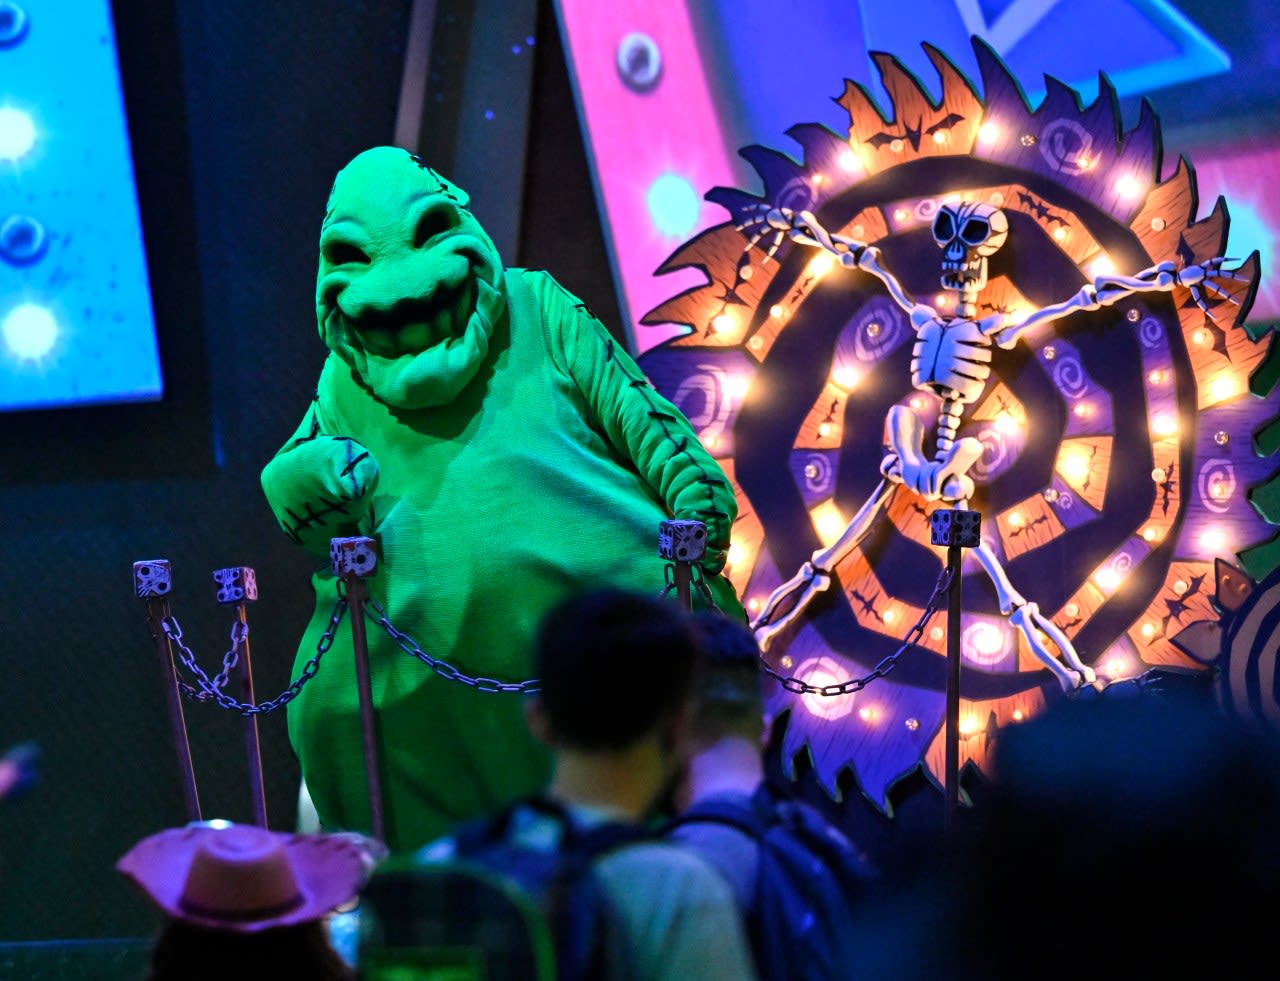 Disney’s Oogie Boogie Bash event tickets to go on sale in June